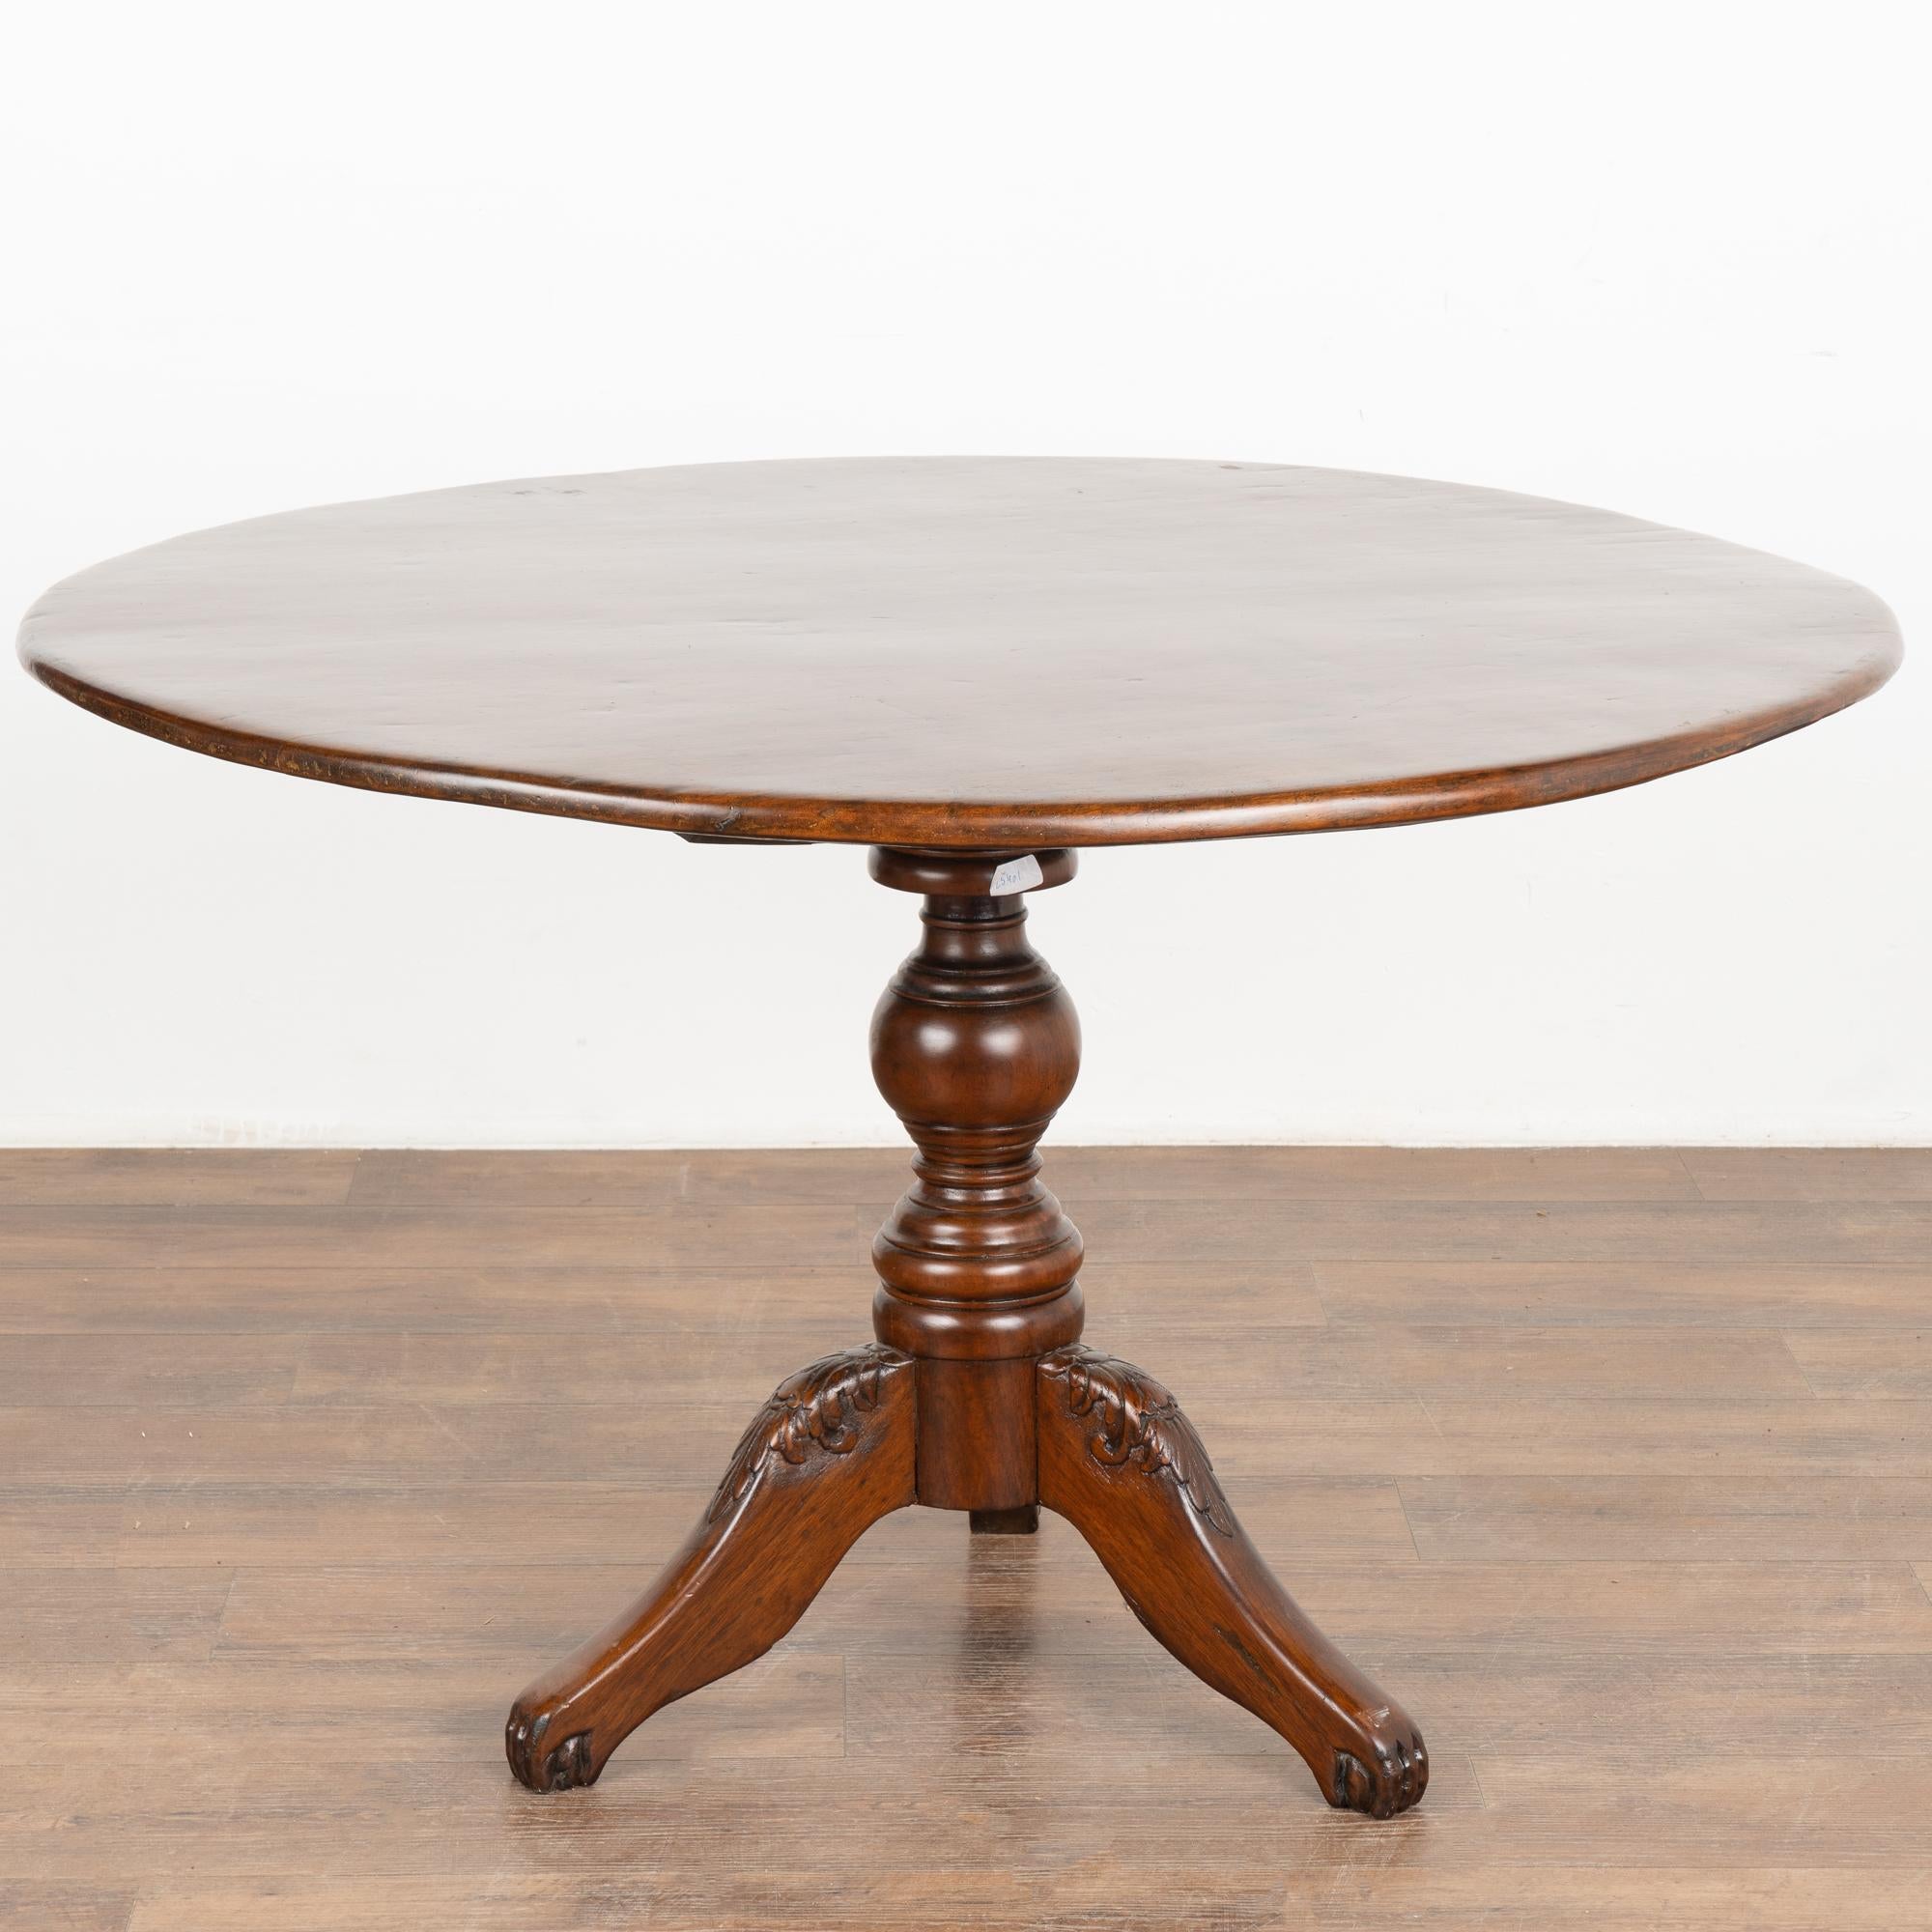 This pedestal table is a wonderful example of Spanish colonial design. The stunning top is made from a single piece of Narra wood and rests on decoratively carved tripod legs.
This pedestal side table is just under 4' round, is restored, solid and